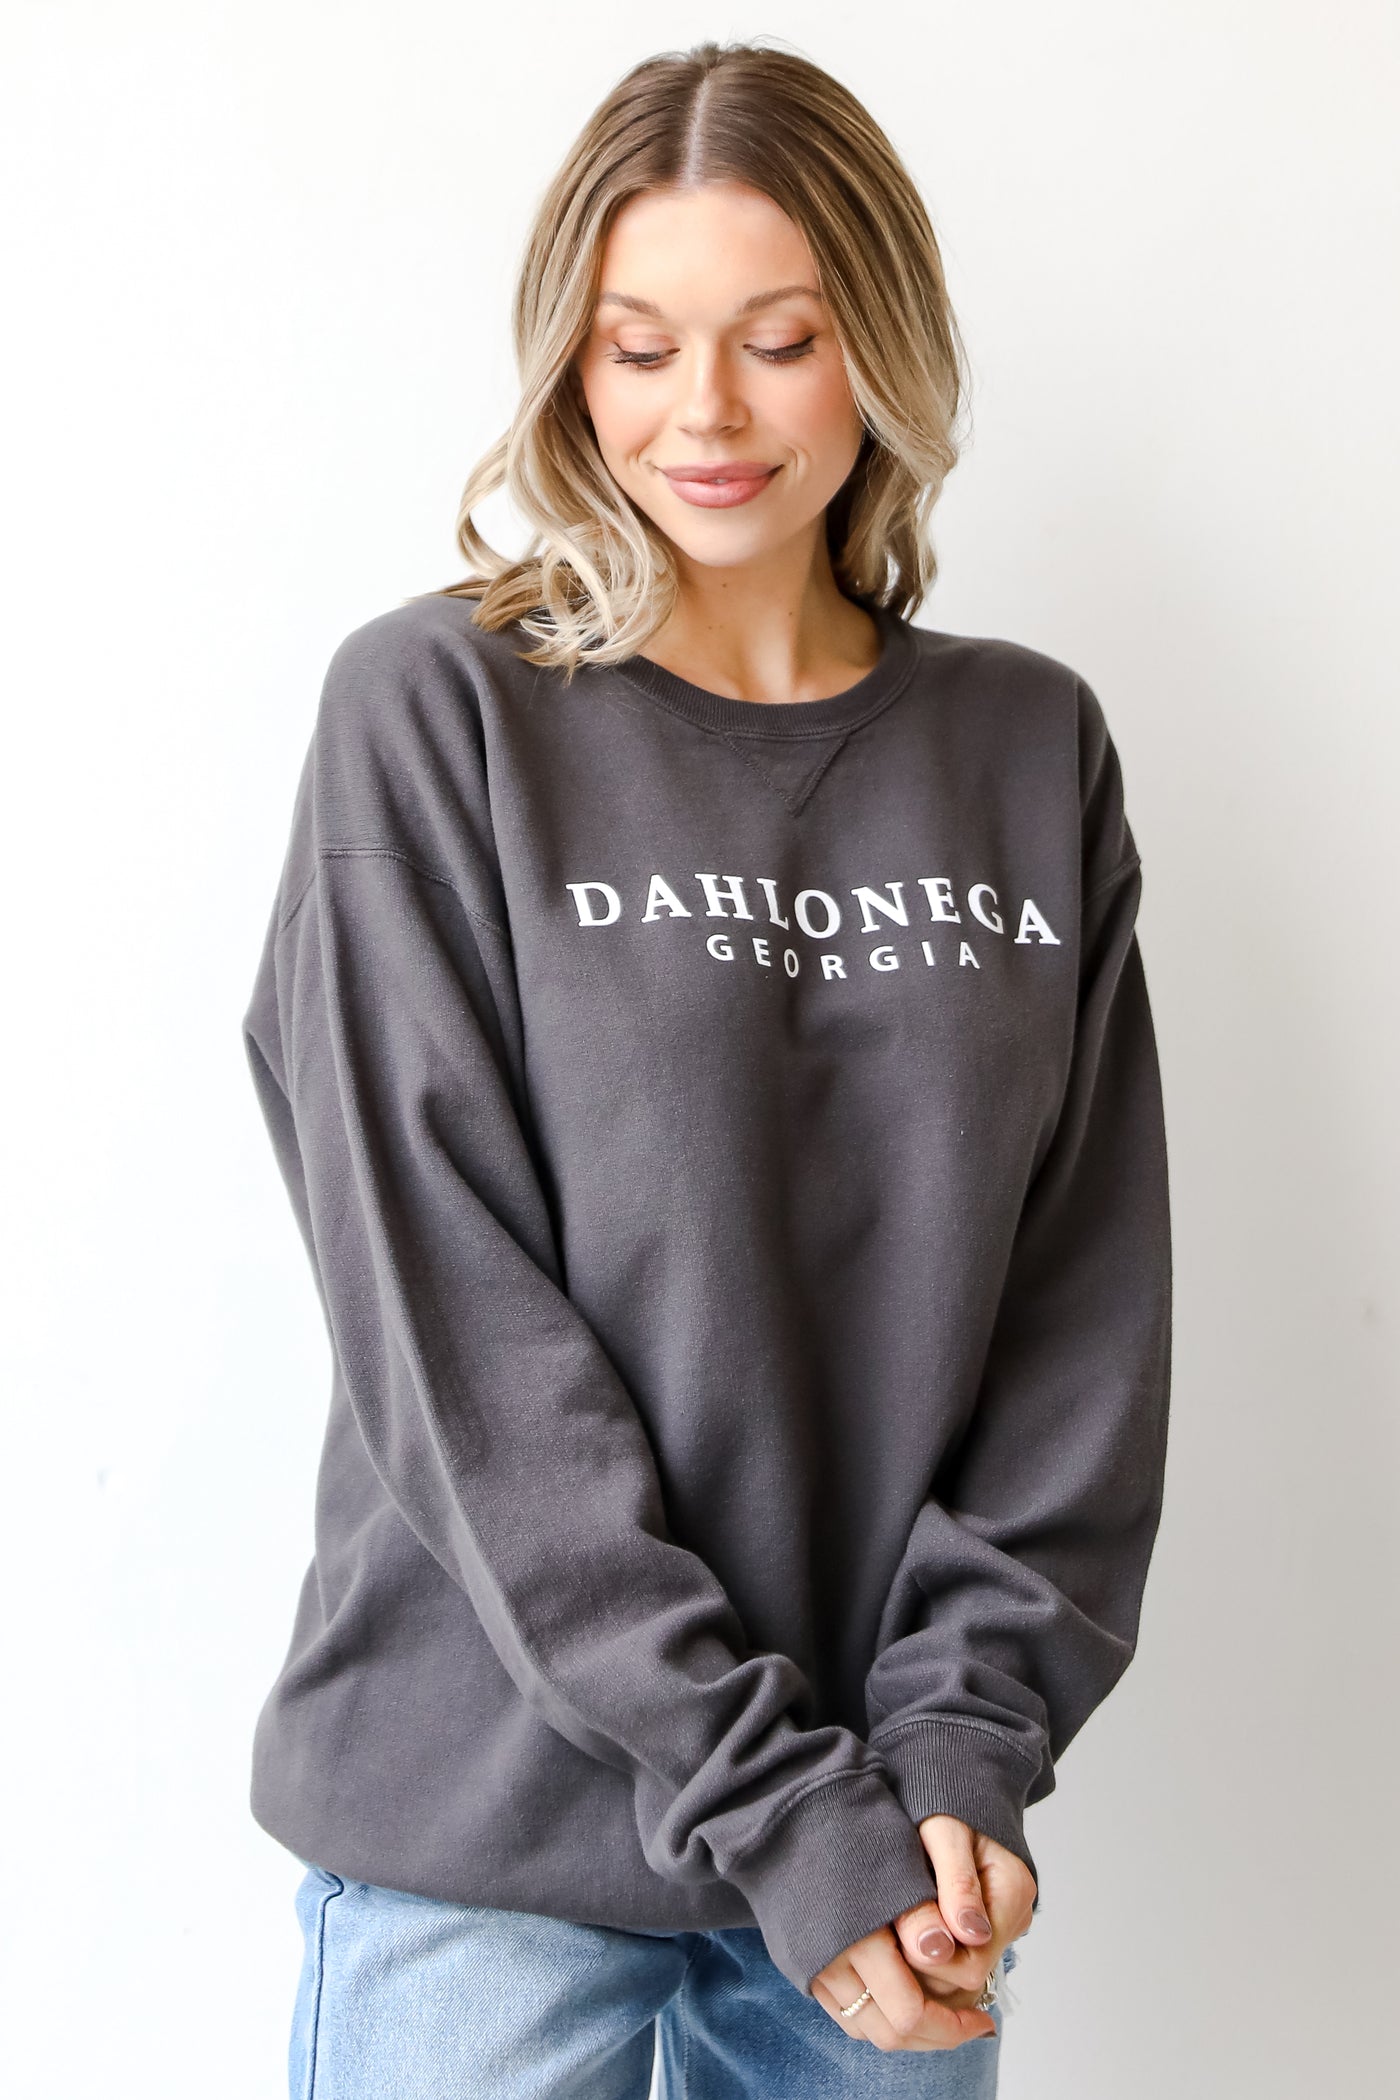 Charcoal Dahlonega Georgia Pullover front view